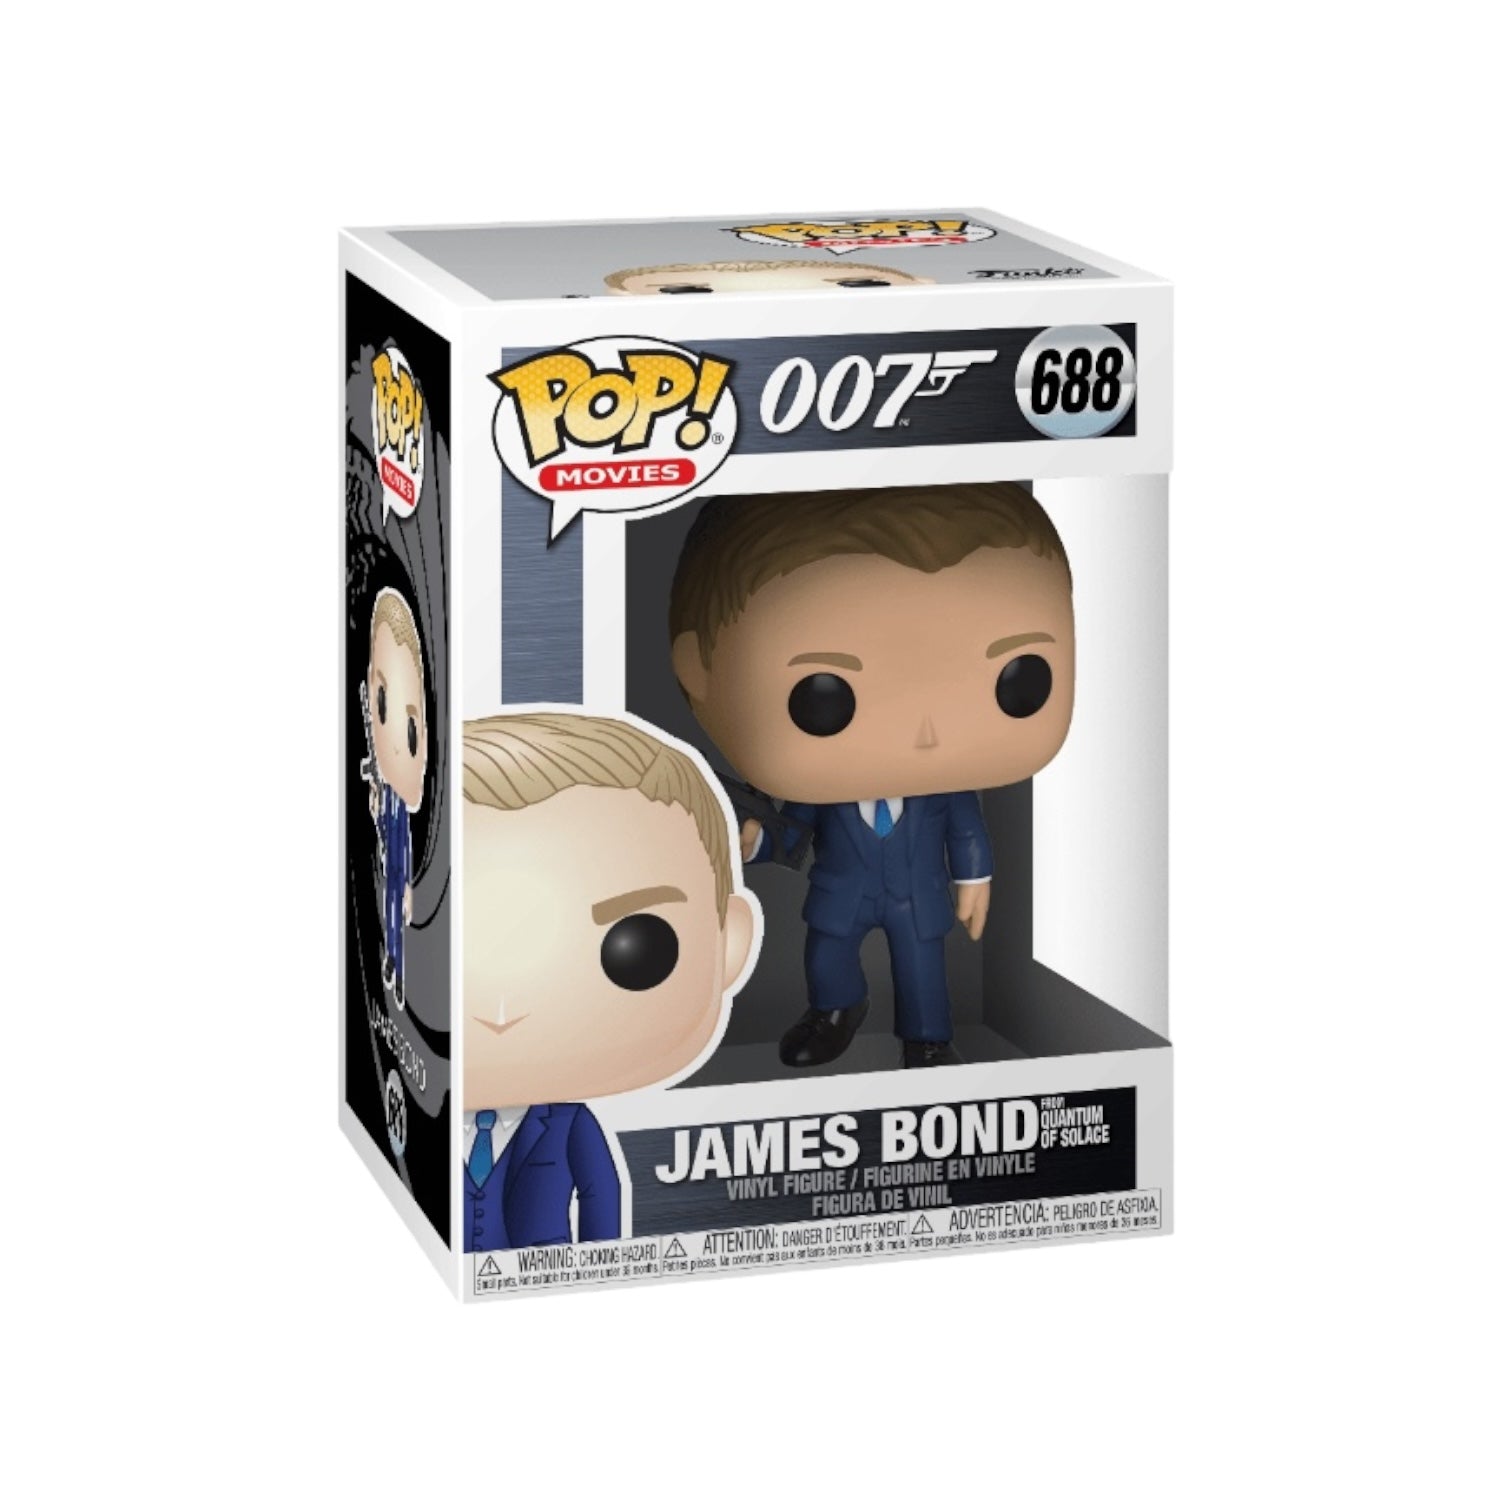 James Bond from Quantun of Solace #688 Funko Pop! - 007